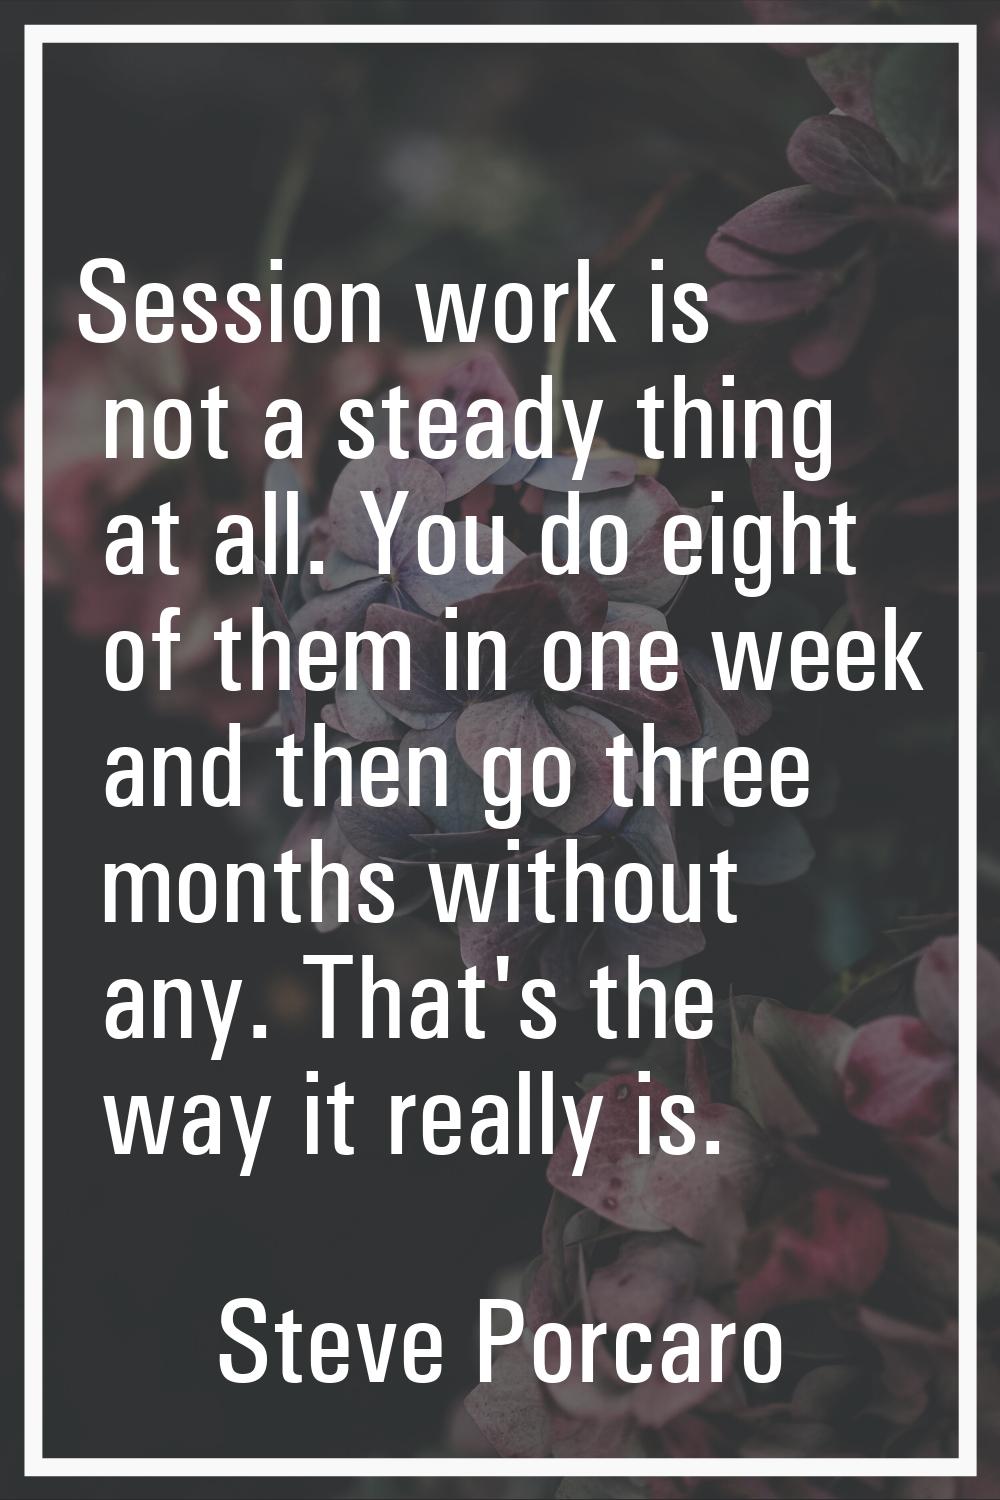 Session work is not a steady thing at all. You do eight of them in one week and then go three month